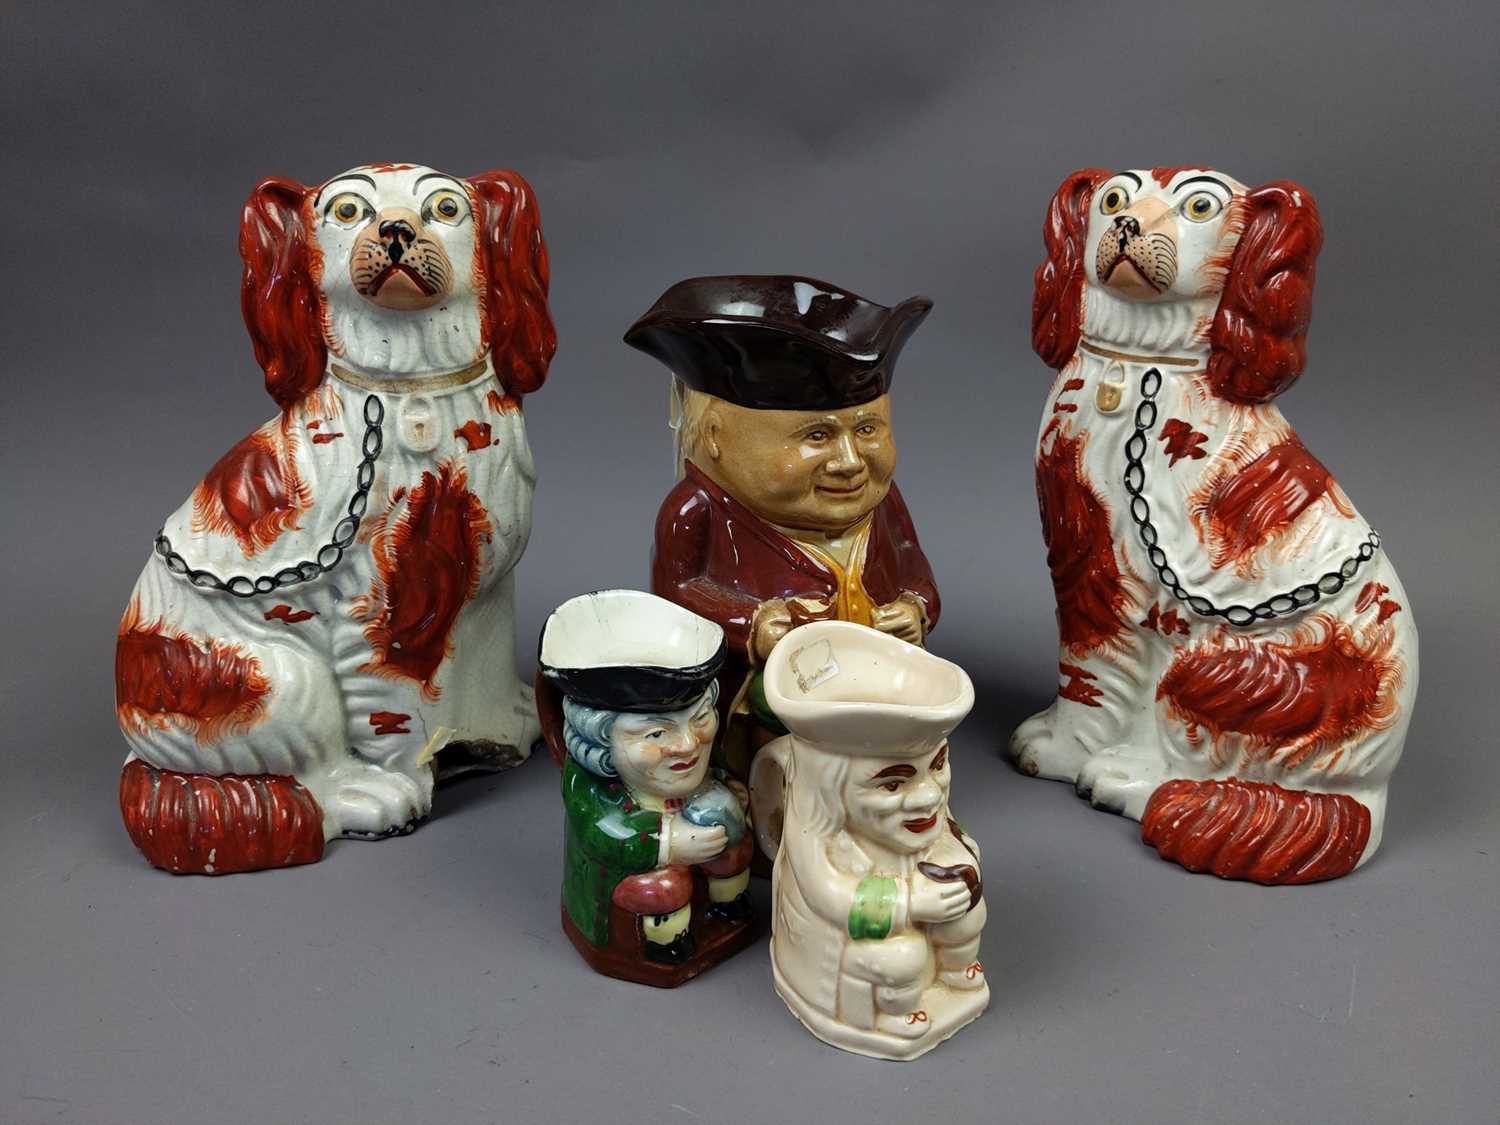 Lot 151 - A PAIR OF VICTORIAN WALLY DOGS ALONG WITH OTHER CERAMICS